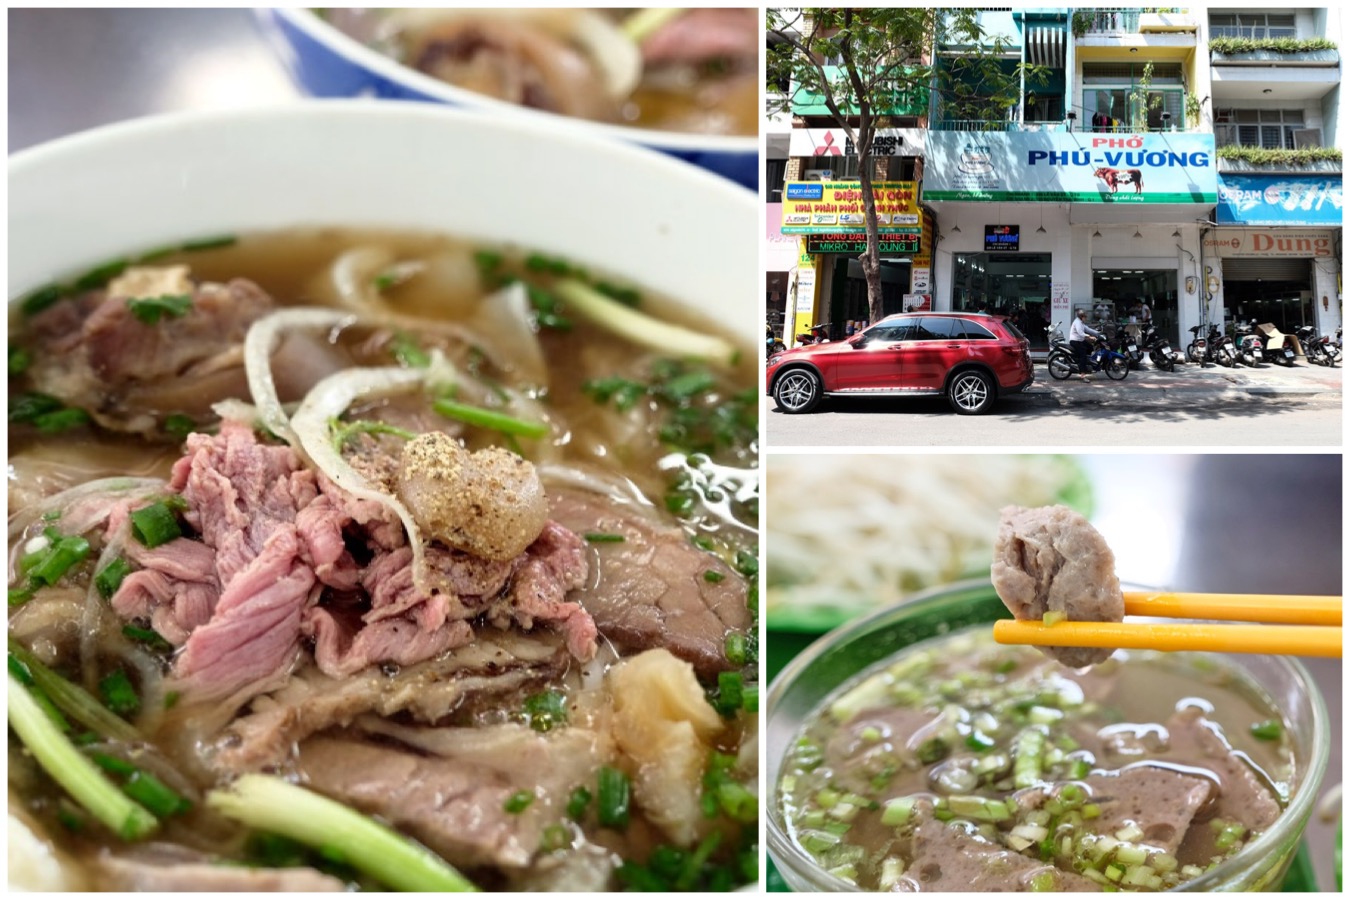 Pho Phu Vuong is recognized as the go-to destination for the best pho in Ho Chi Minh City